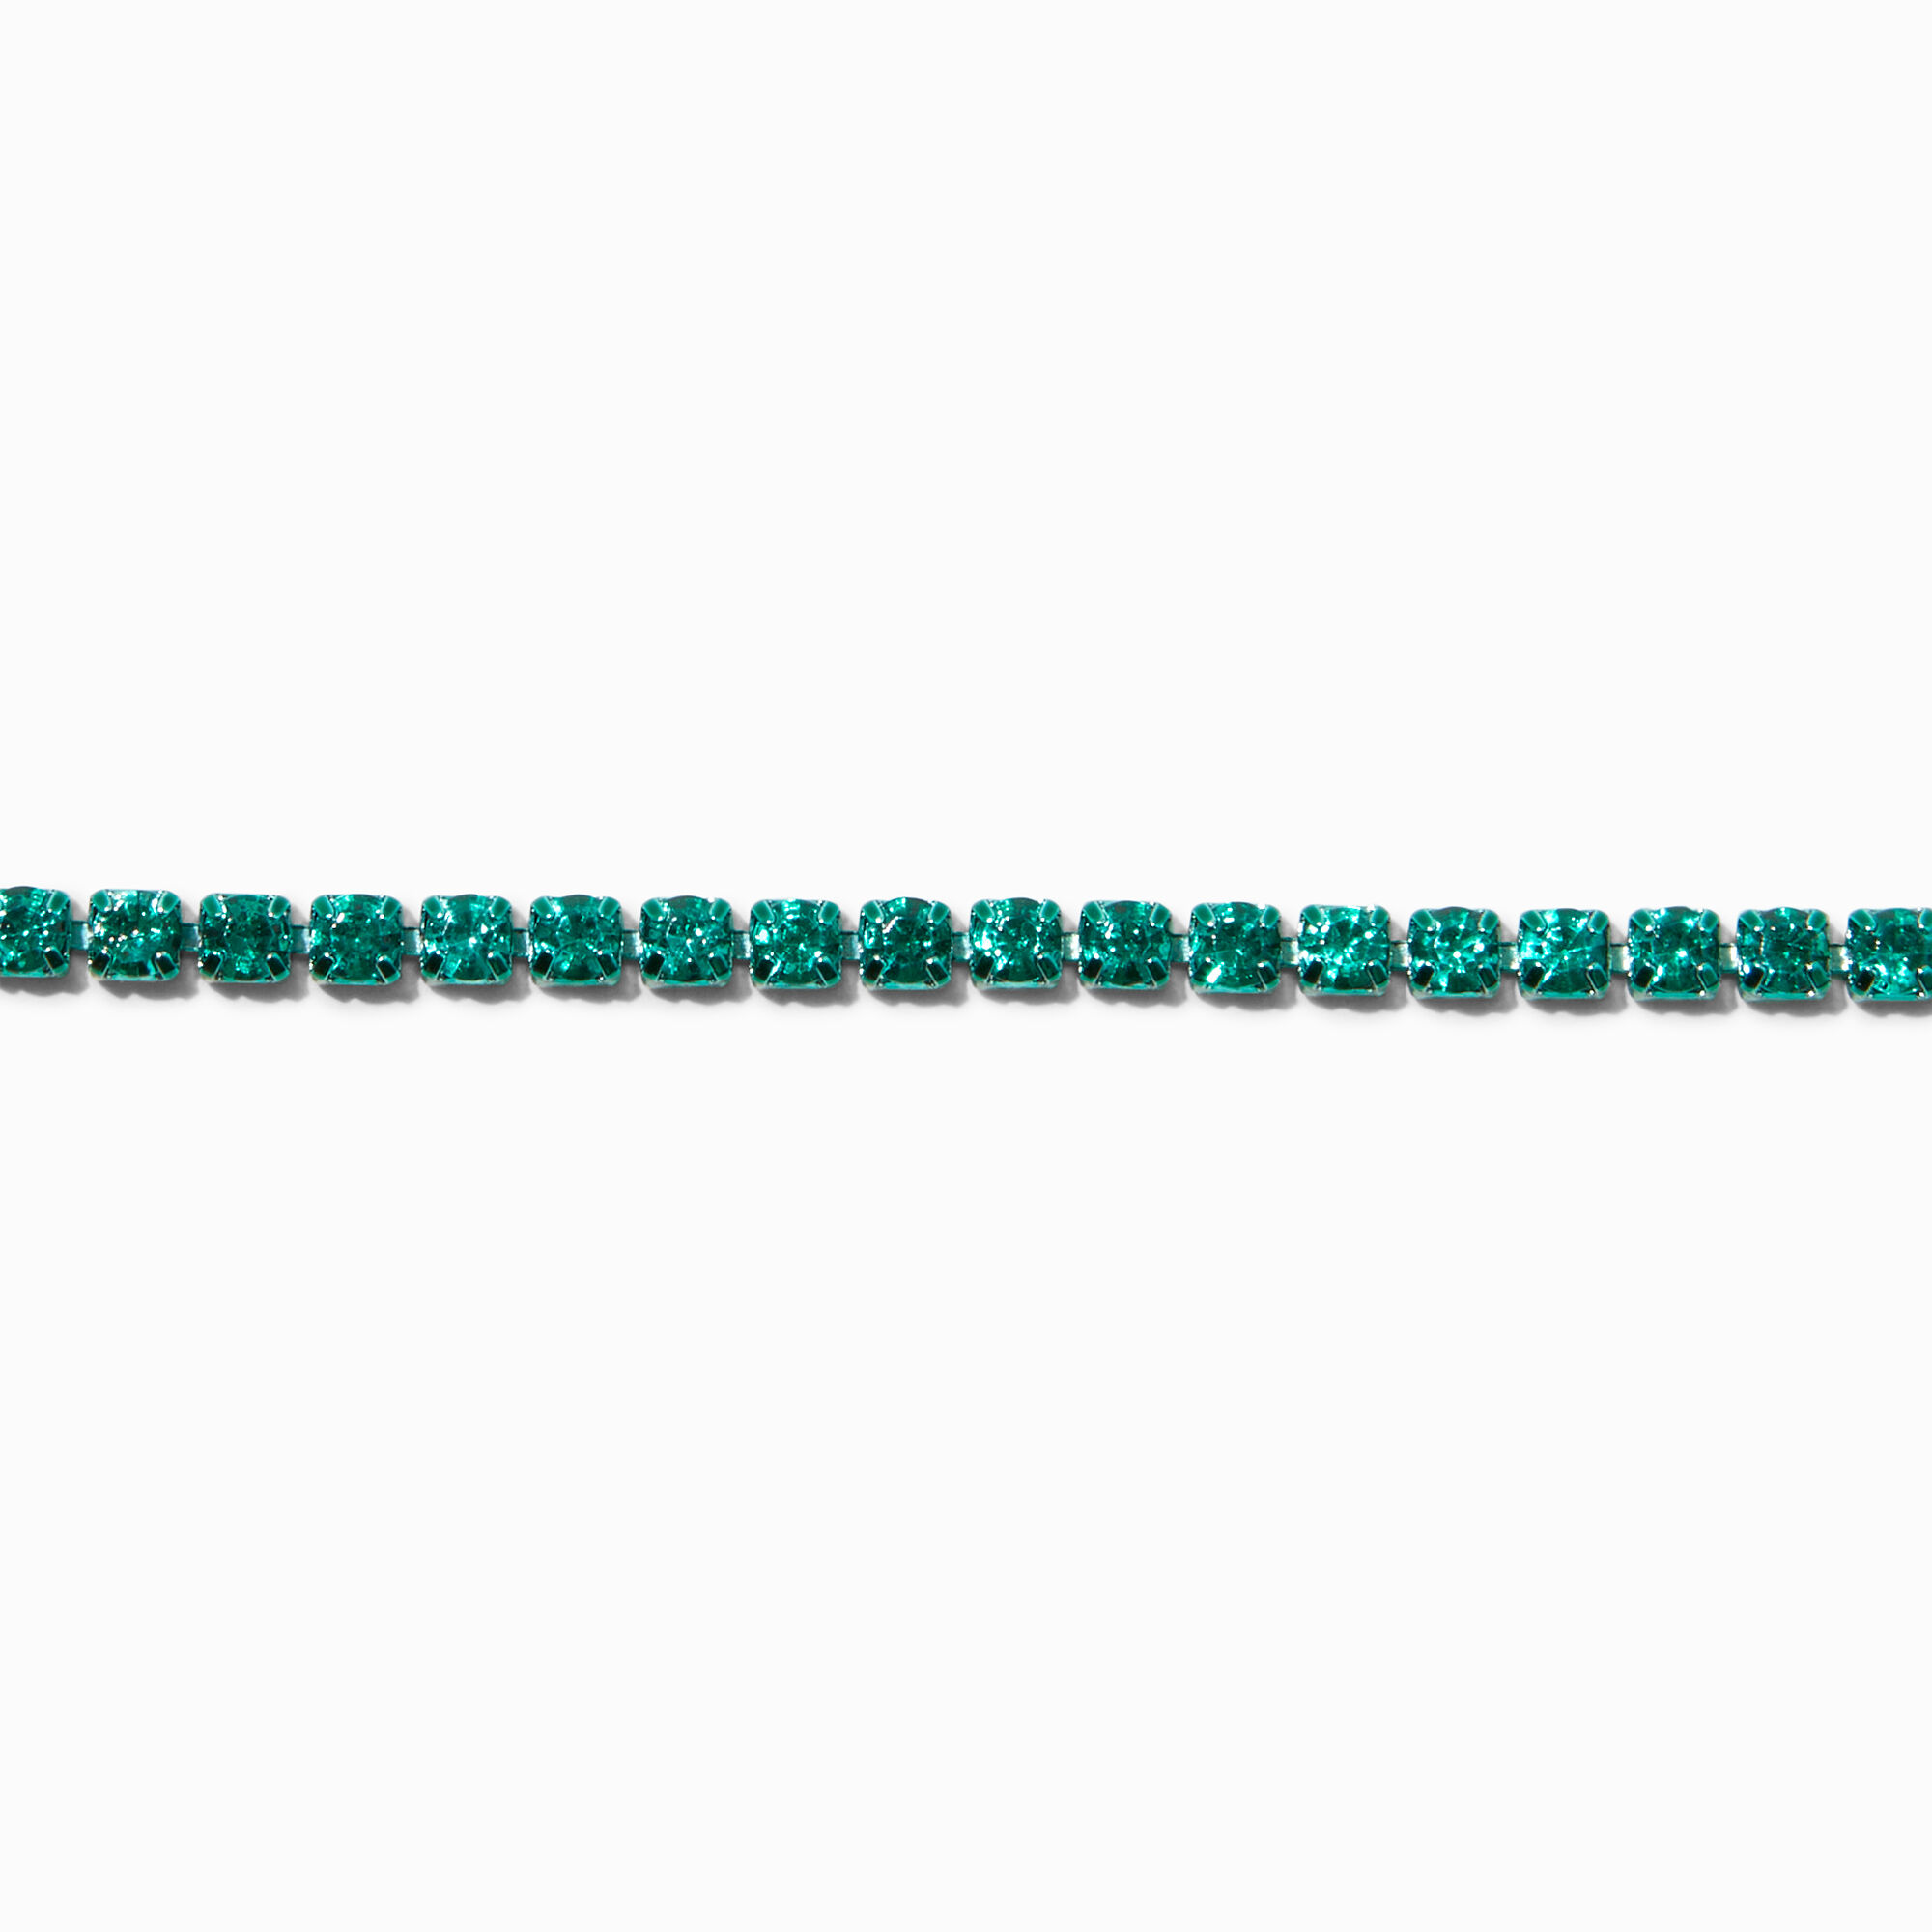 View Claires Bright Crystal Anodized Cup Chain Choker Necklace Green information